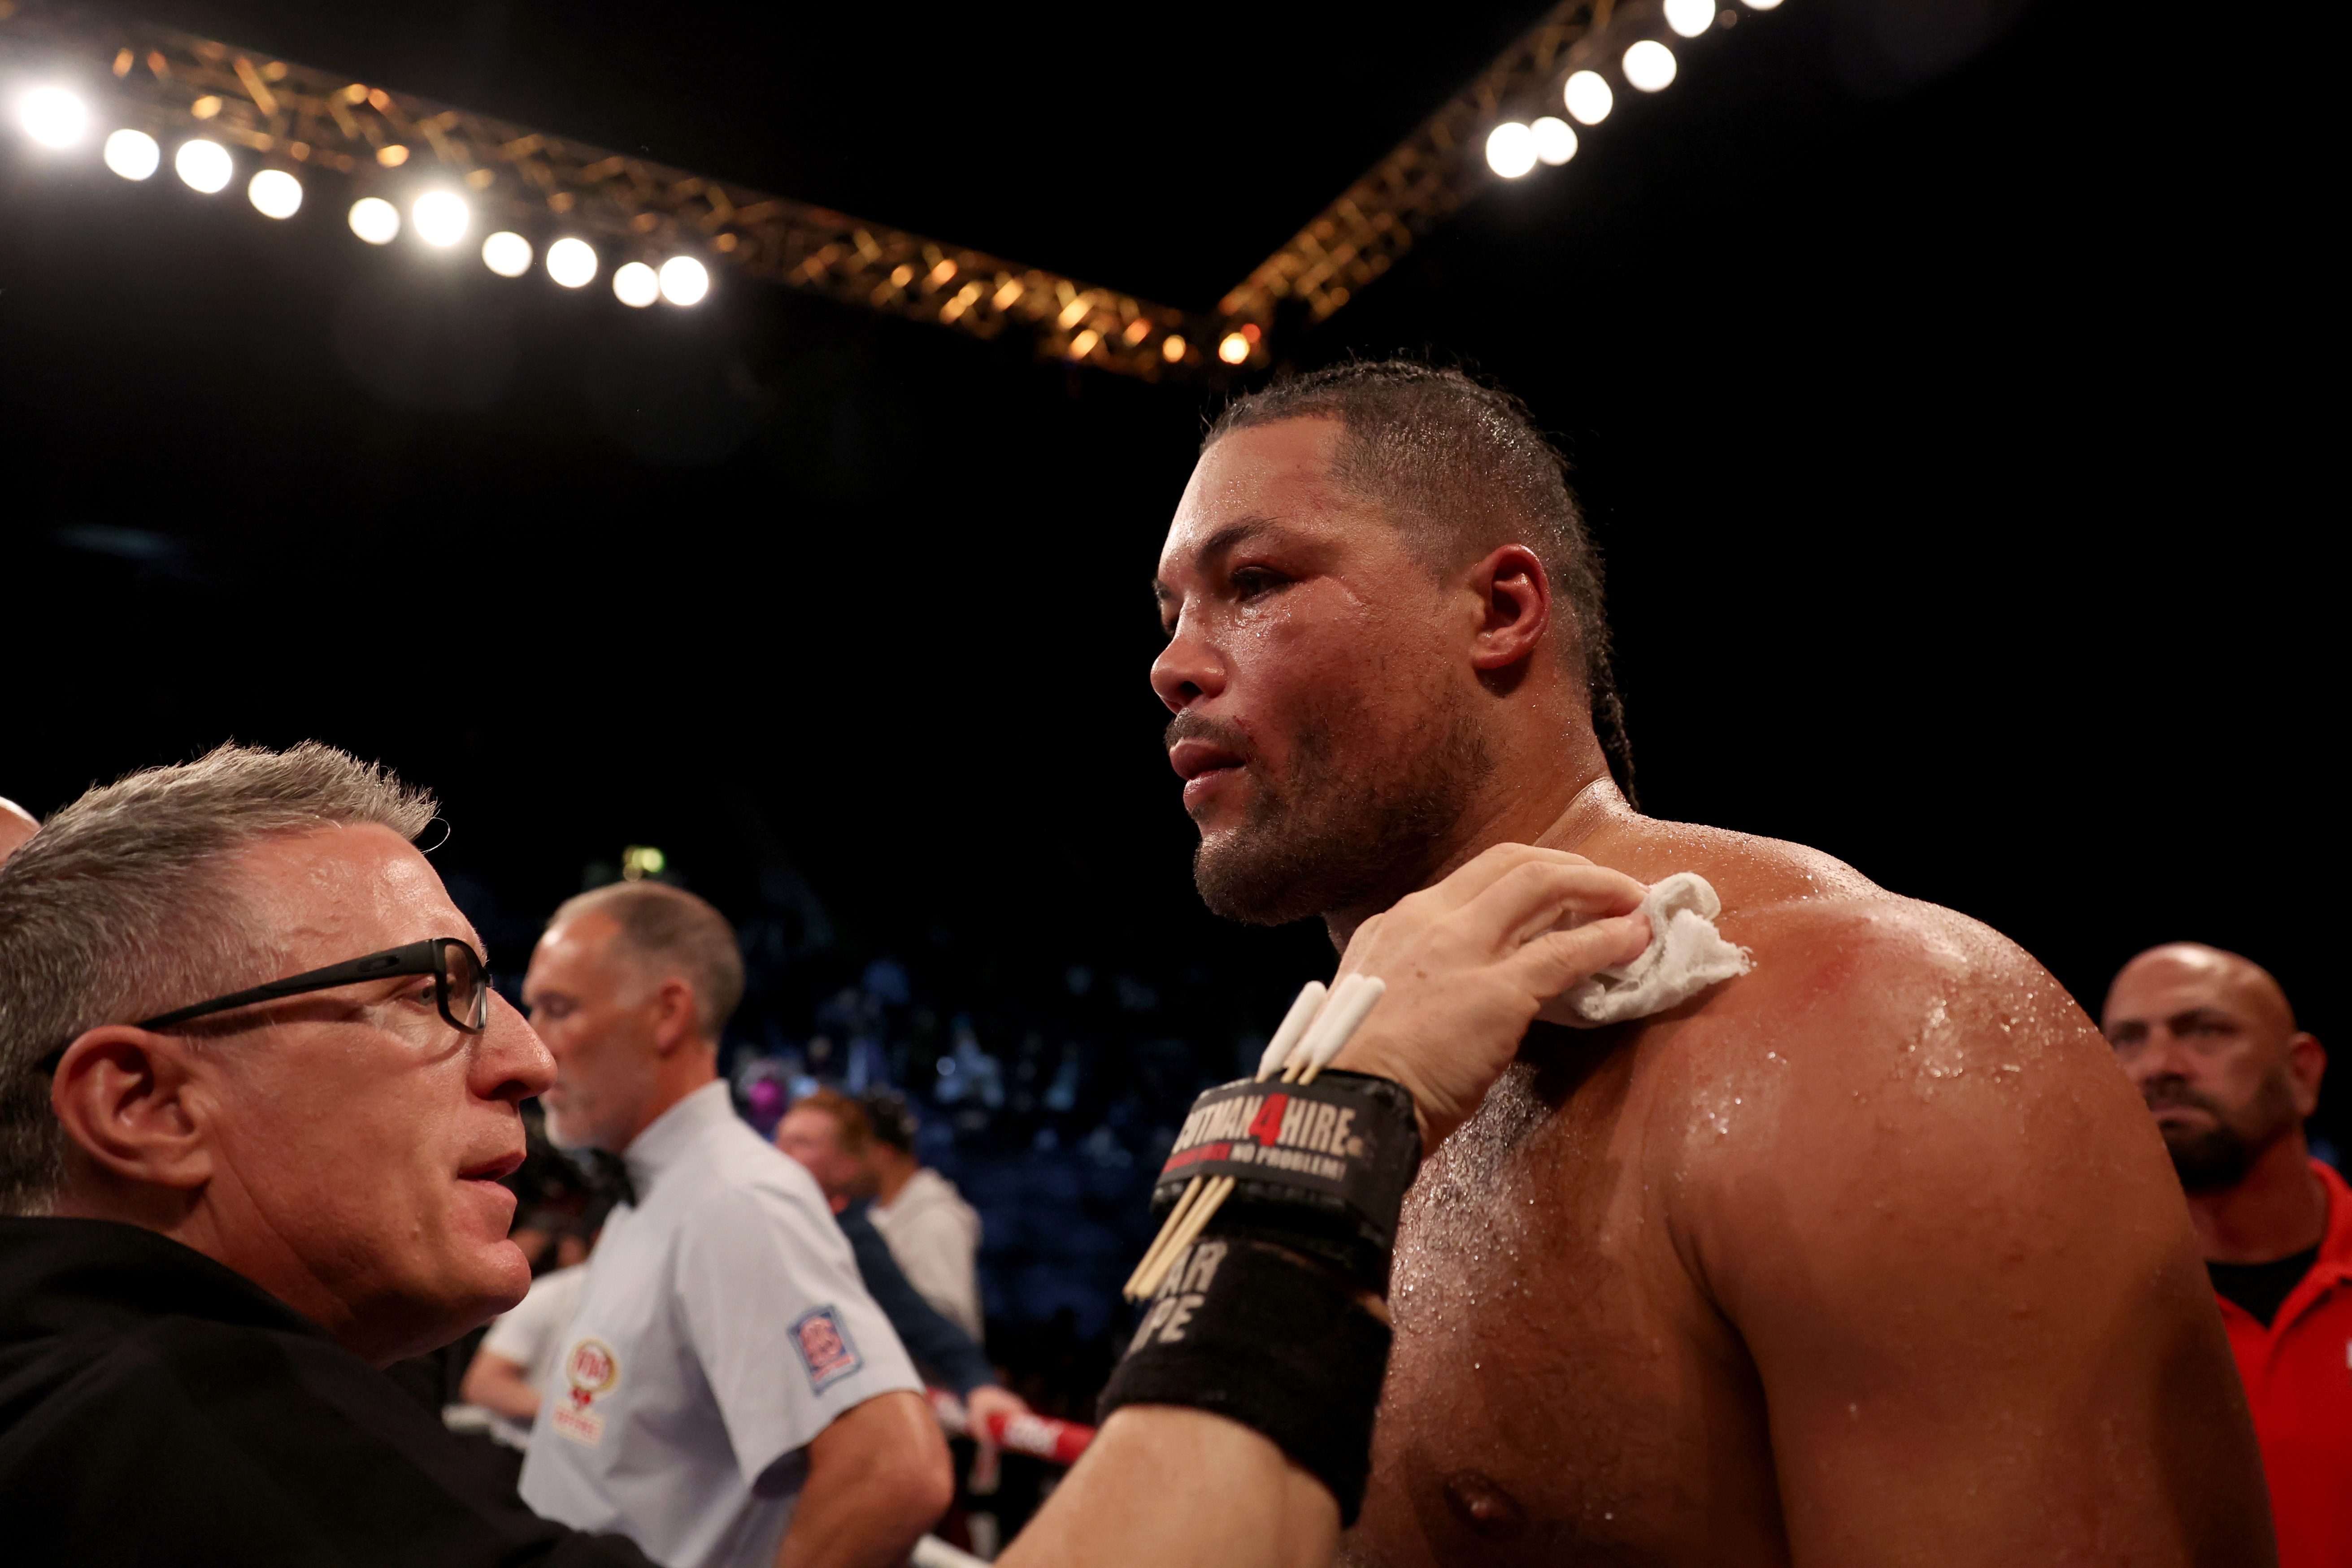 Joe Joyce says he’ll aim to come back stronger after losing again to Zhilei Zhang